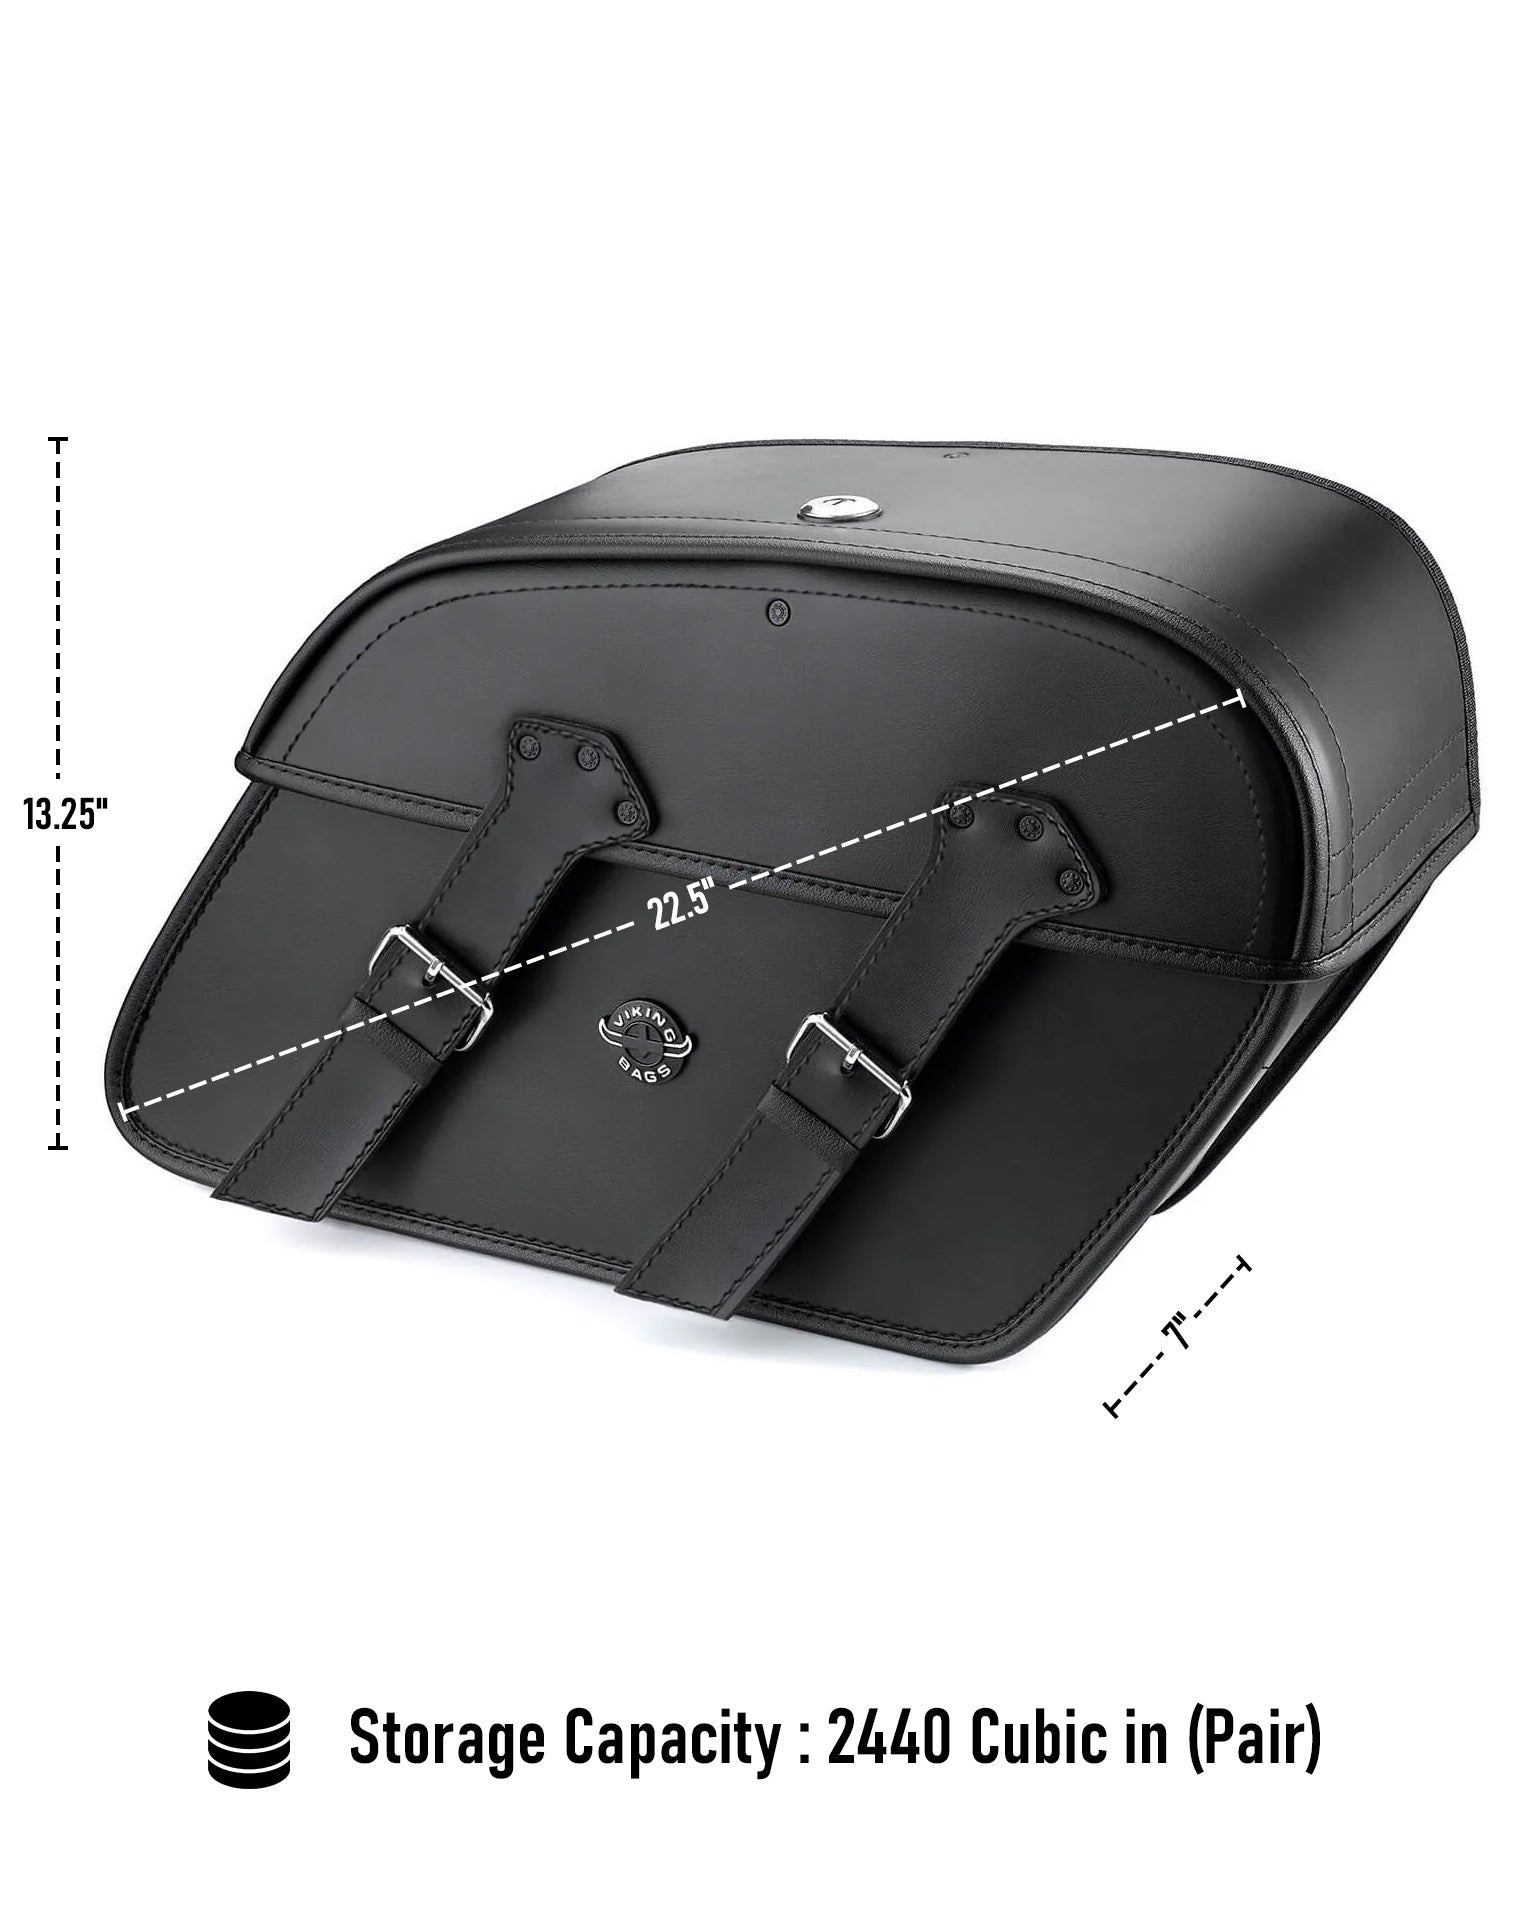 Viking Raven Extra Large Suzuki Boulevard S40 Savage Ls650 Leather Motorcycle Saddlebags Can Store Your Ridings Gears